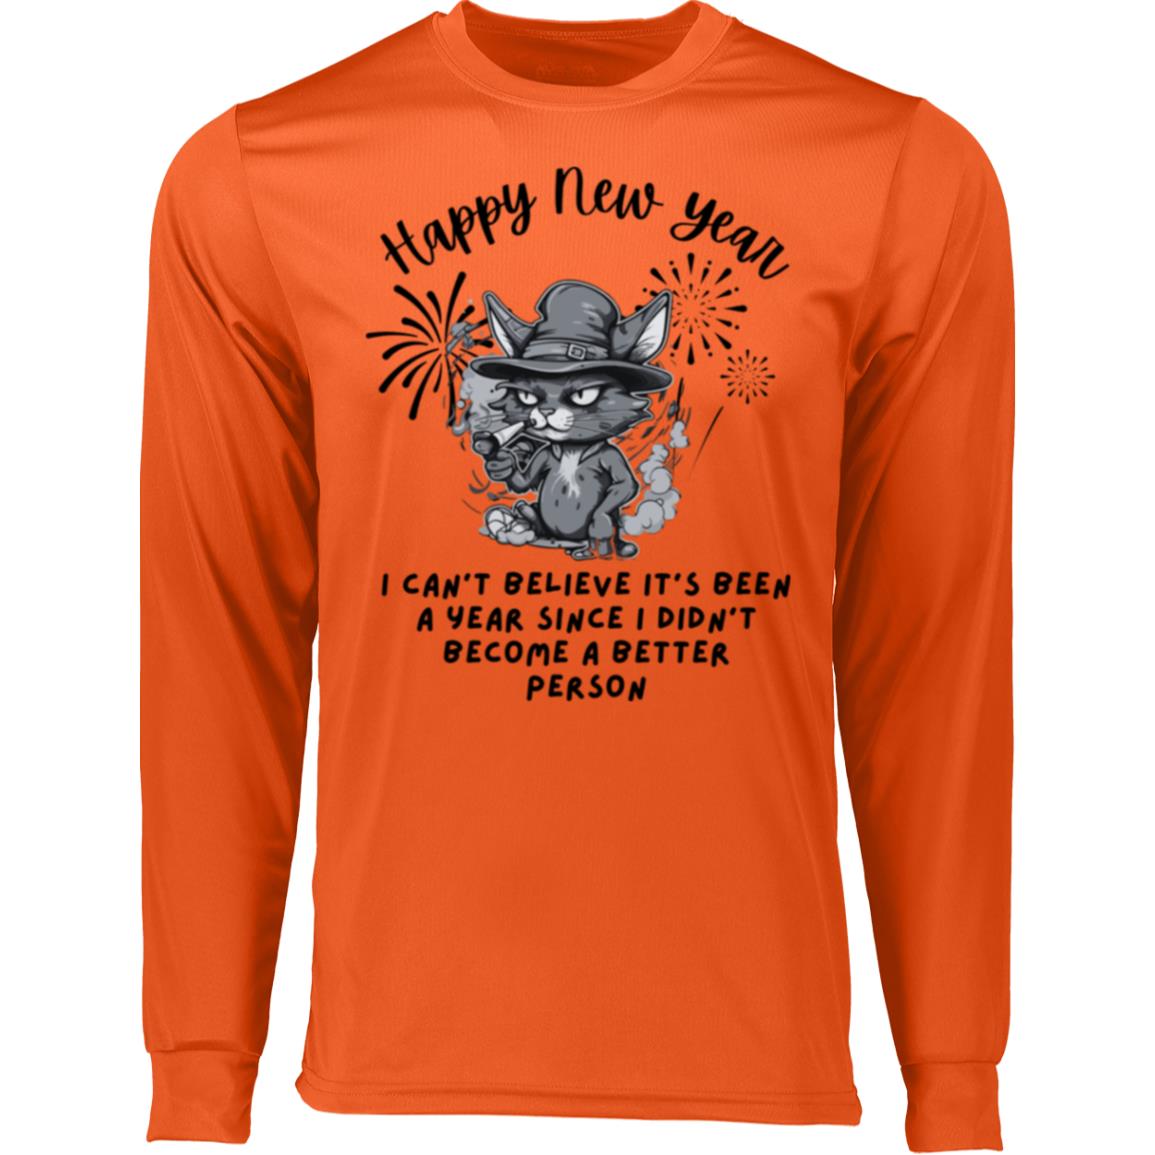 New Year's Humor Tee: Light Up Laughter!